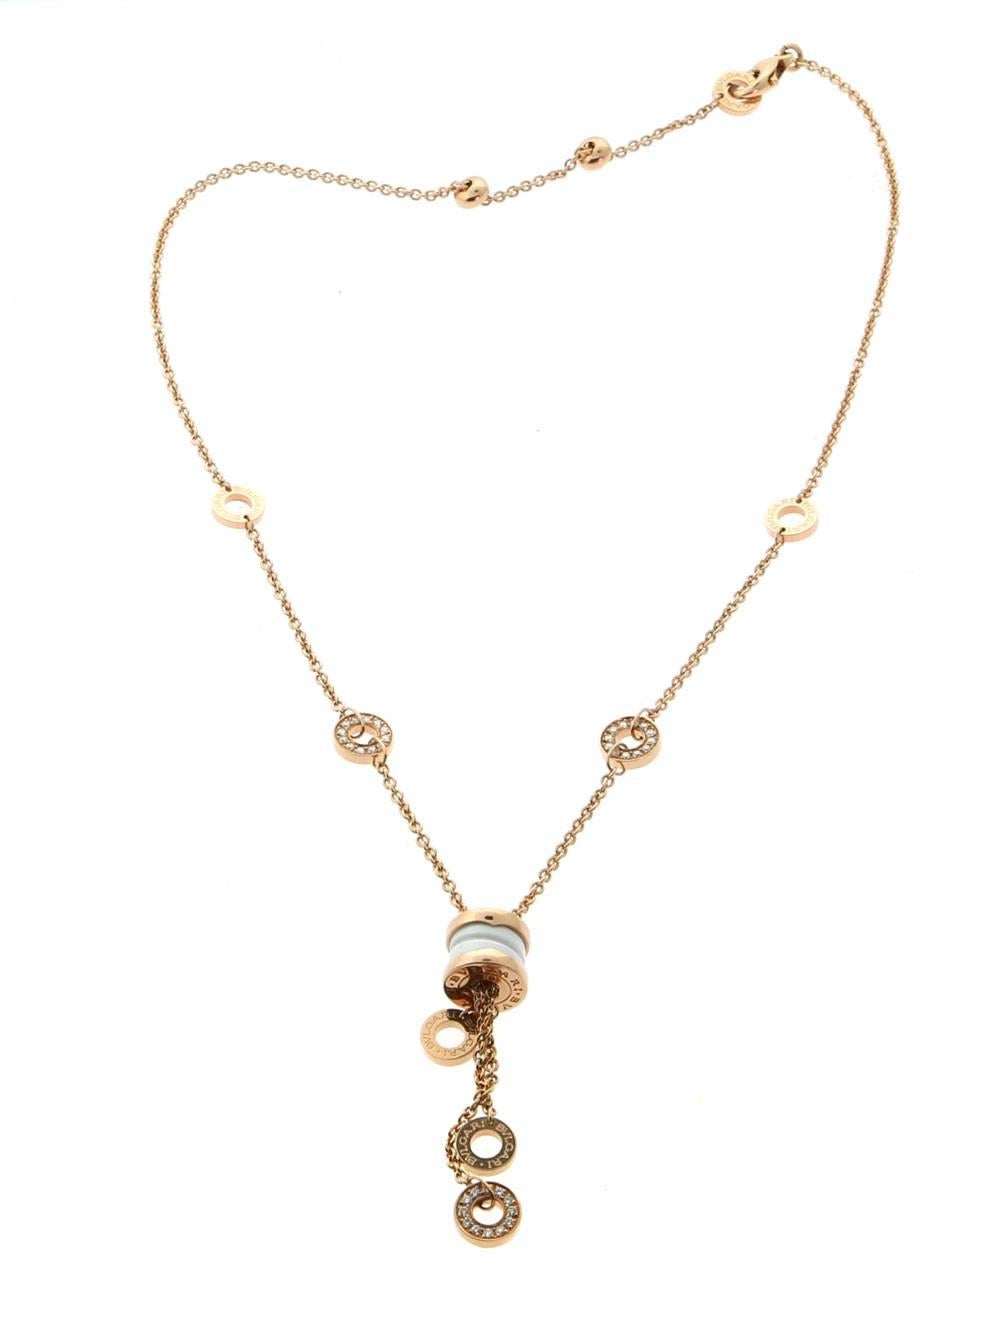 The Bulgari Ceramic Diamond Necklace from the B.Zero 1 collection is the perfect complement to an evening gown, a work pantsuit or even jeans and a tee shirt. With this elegant necklace in your jewelry box, you’ll have a dependable go-to piece. To